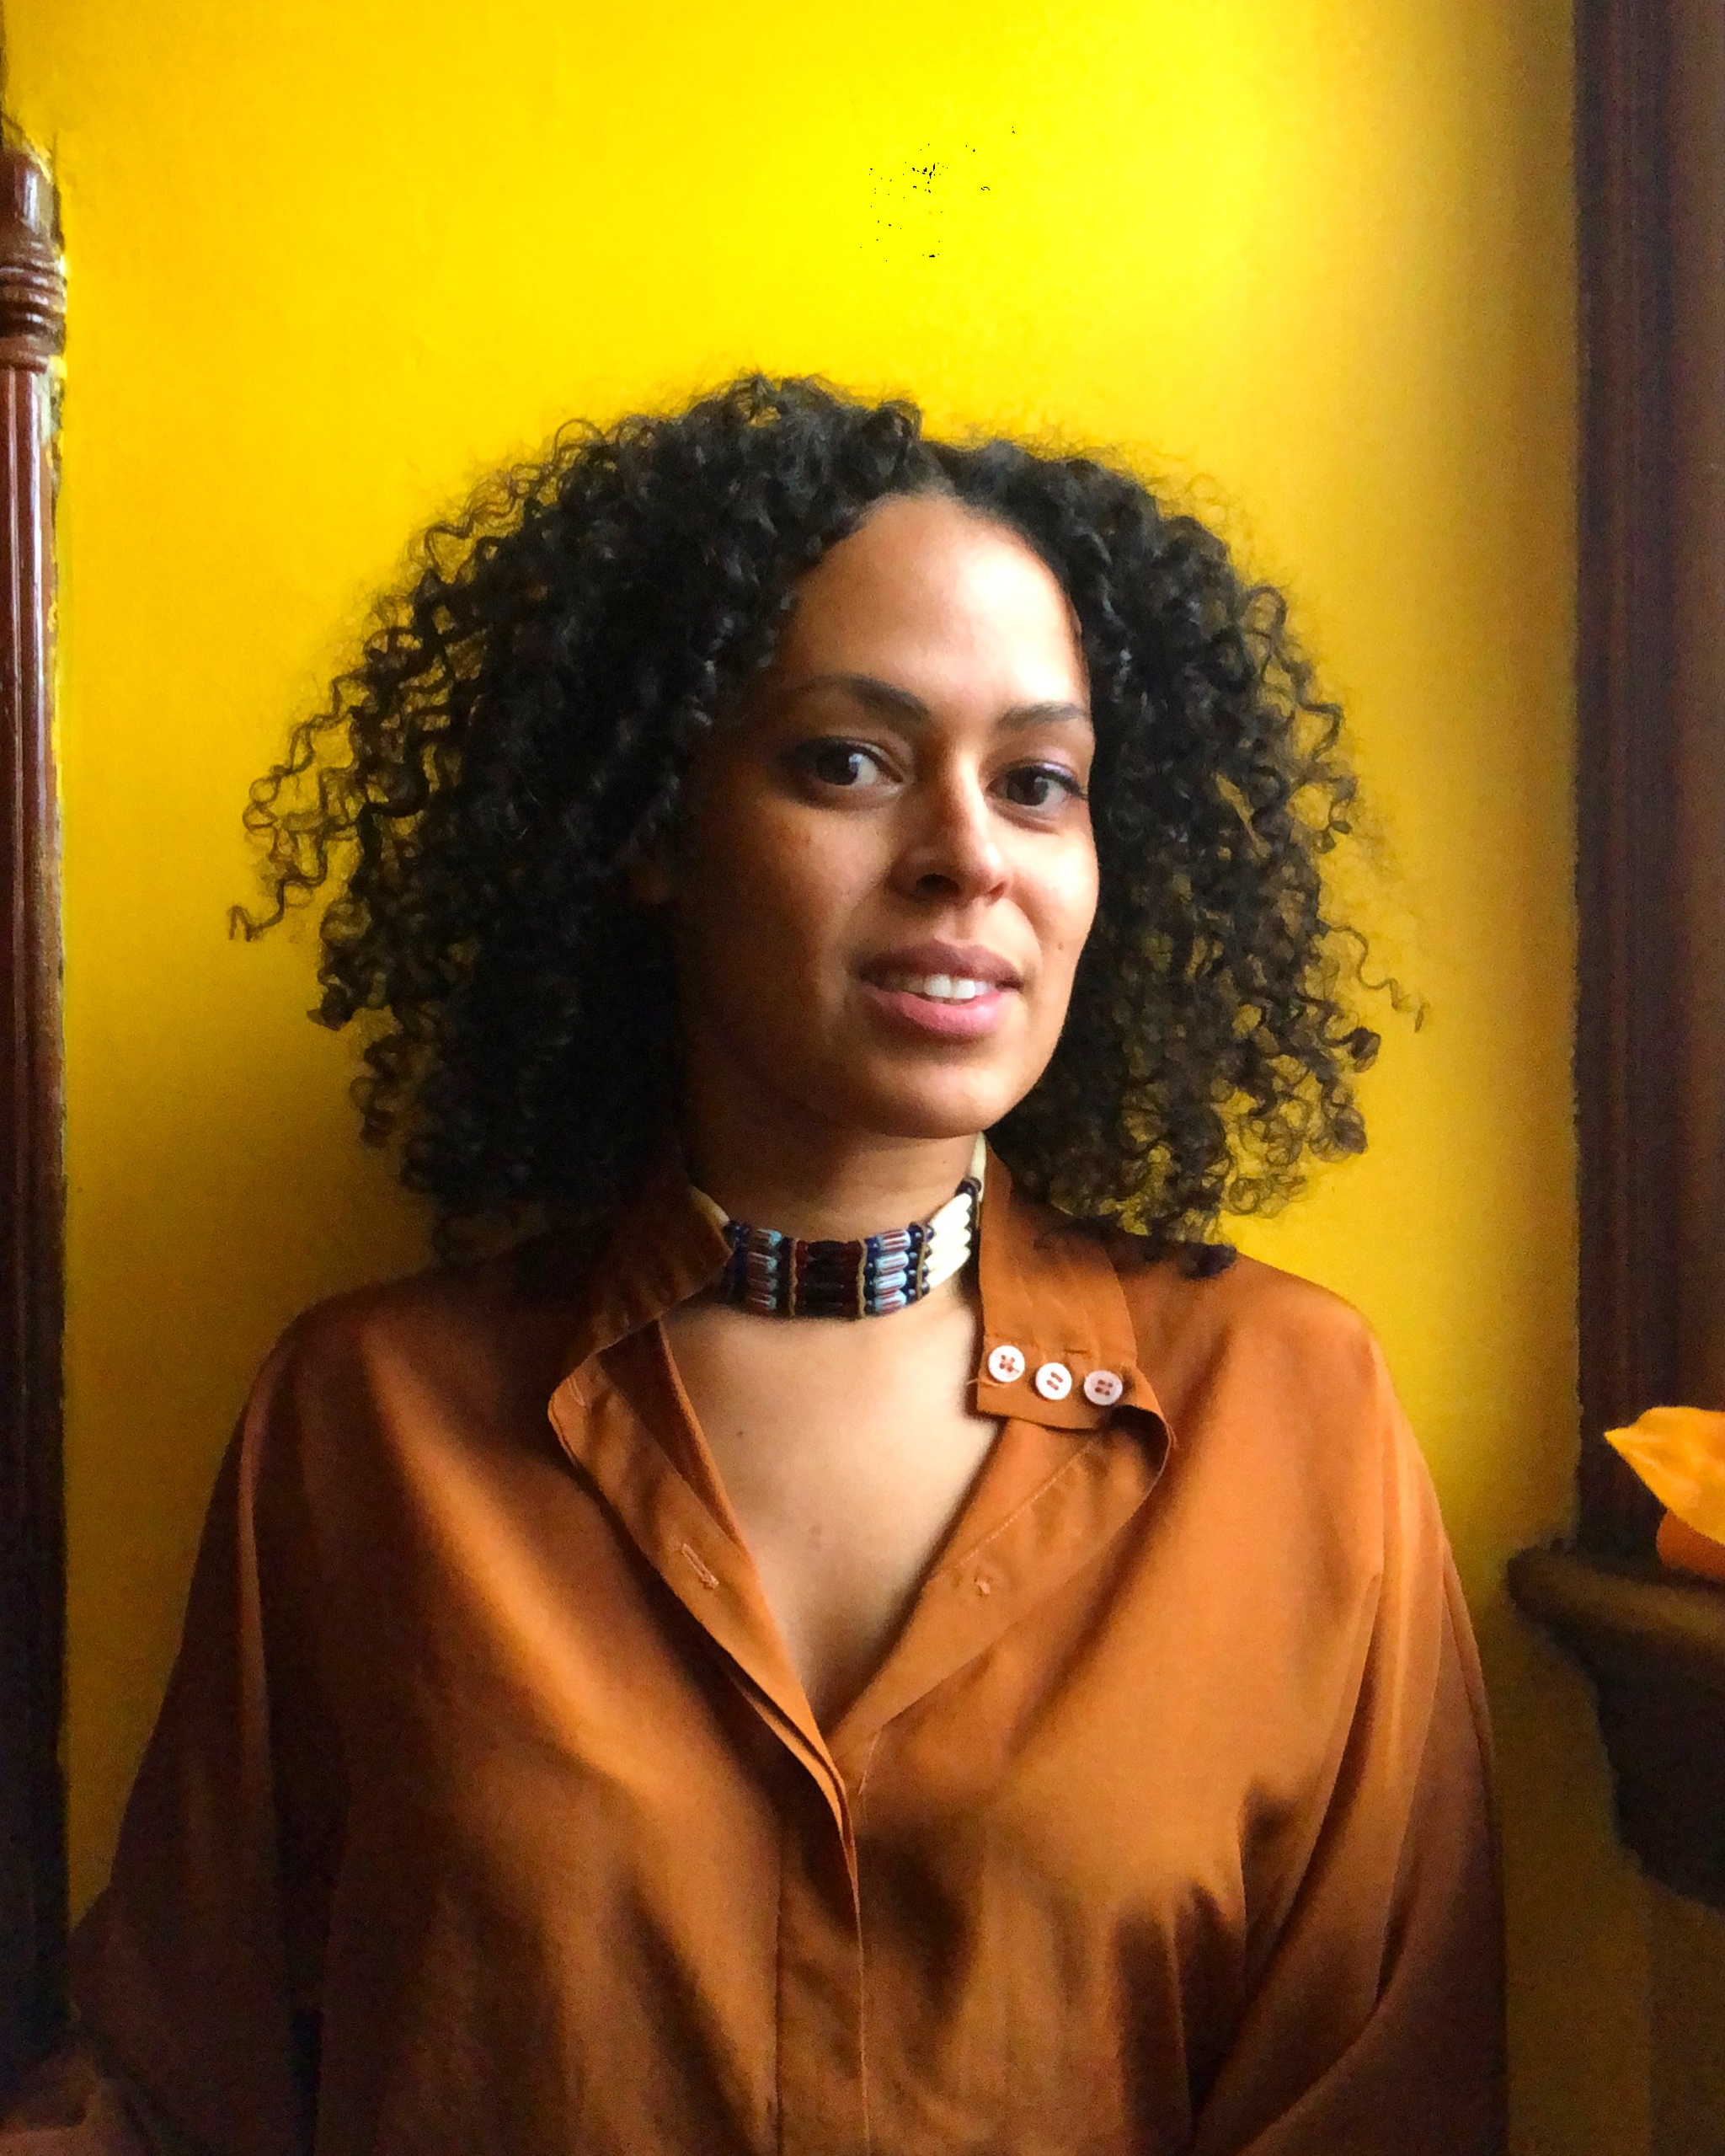 A photo of the artist Ana María Agüero Jahannes against a bright yellow background. Jahannes has curly hair and wears an orange-brown blouse and beaded choker. 